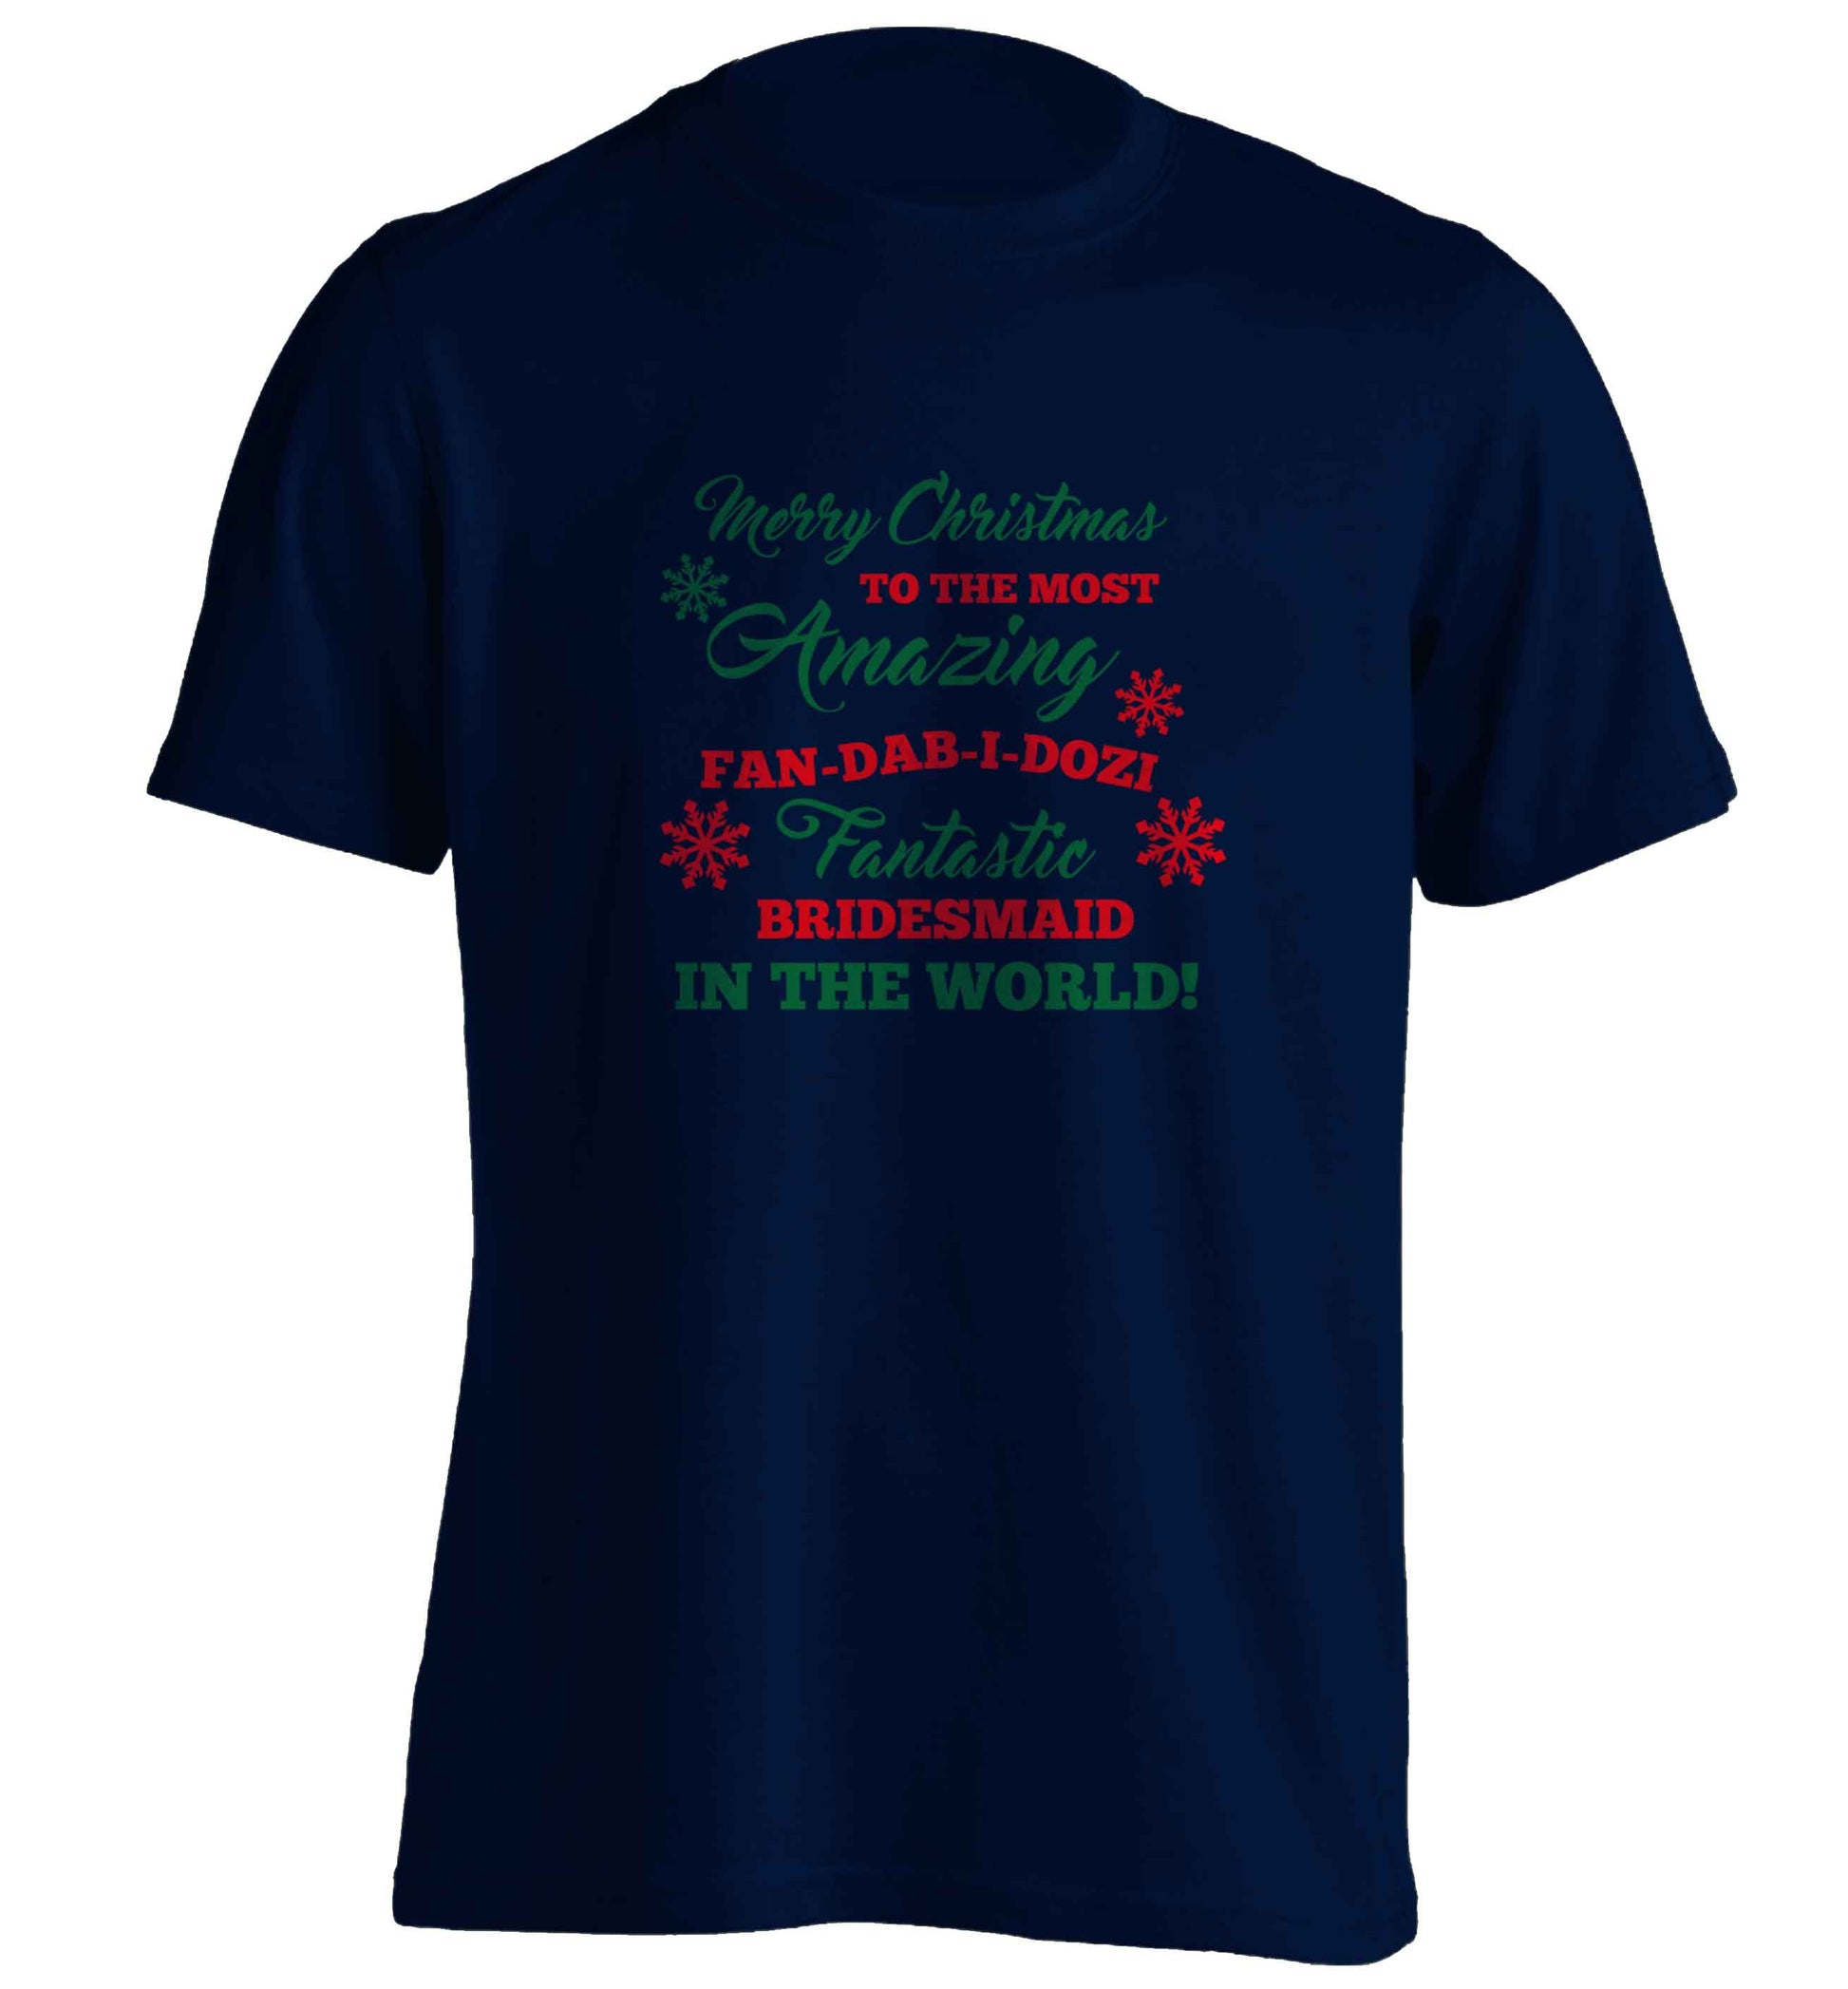 Merry Christmas to the most amazing fan-dab-i-dozi fantasic bridesmaid in the world adults unisex navy Tshirt 2XL